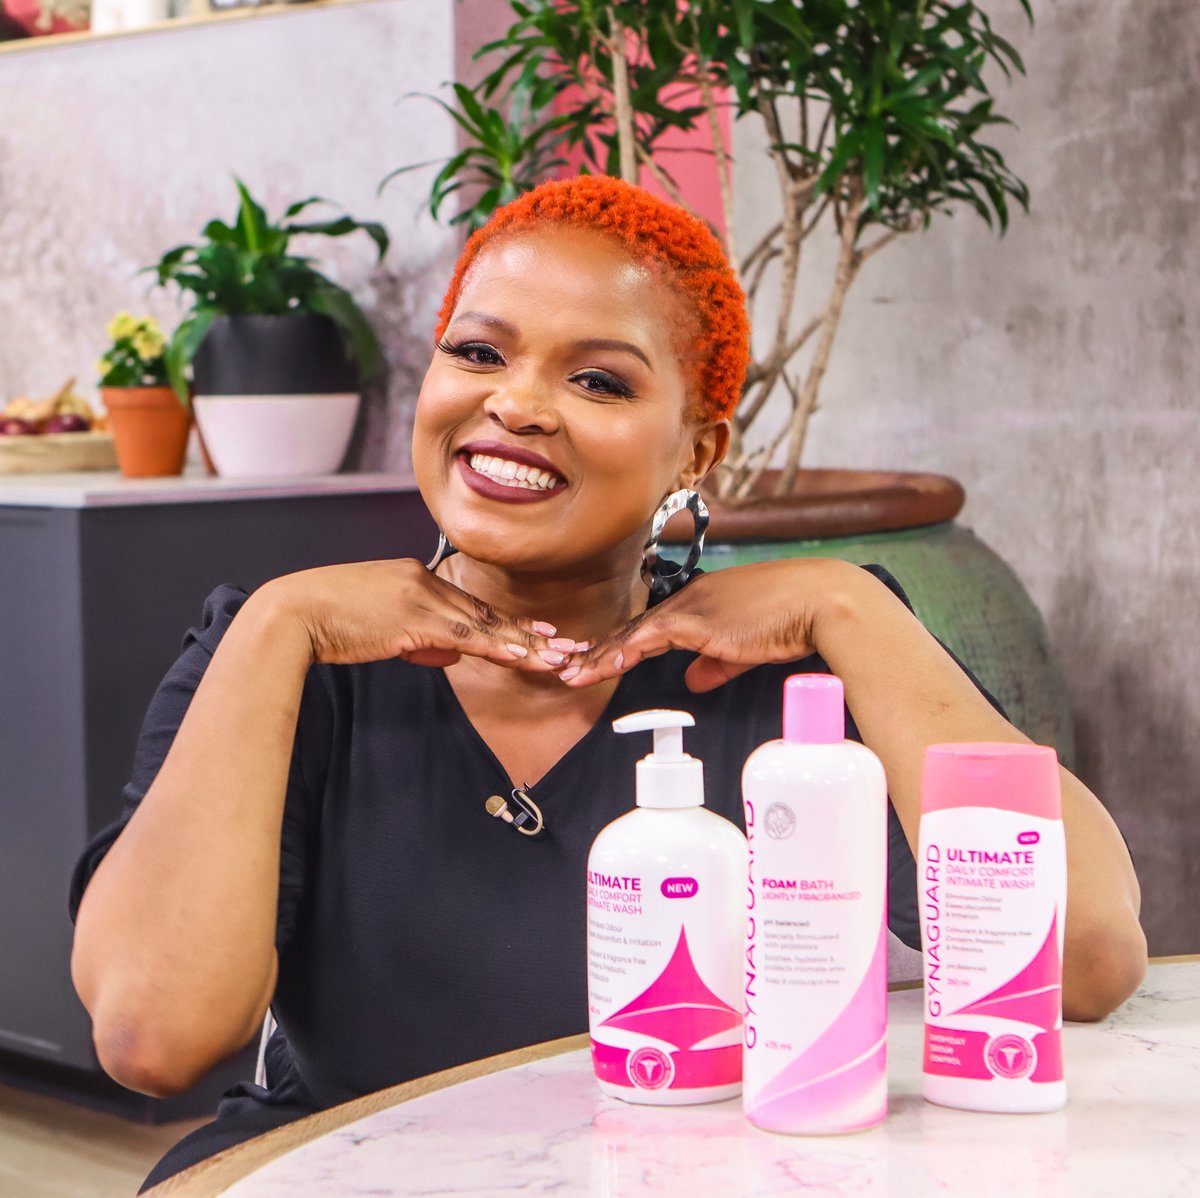 WIN 1 of 10 Fieldbar luxury cooler boxes! 💞

To enter, buy any @GynaGuard Intimate Wash 140ml, snap a photo of your receipt and Whatsapp it to 066 417 1923. Ts&Cs apply. #FreeToJustBe #AfternoonExpress